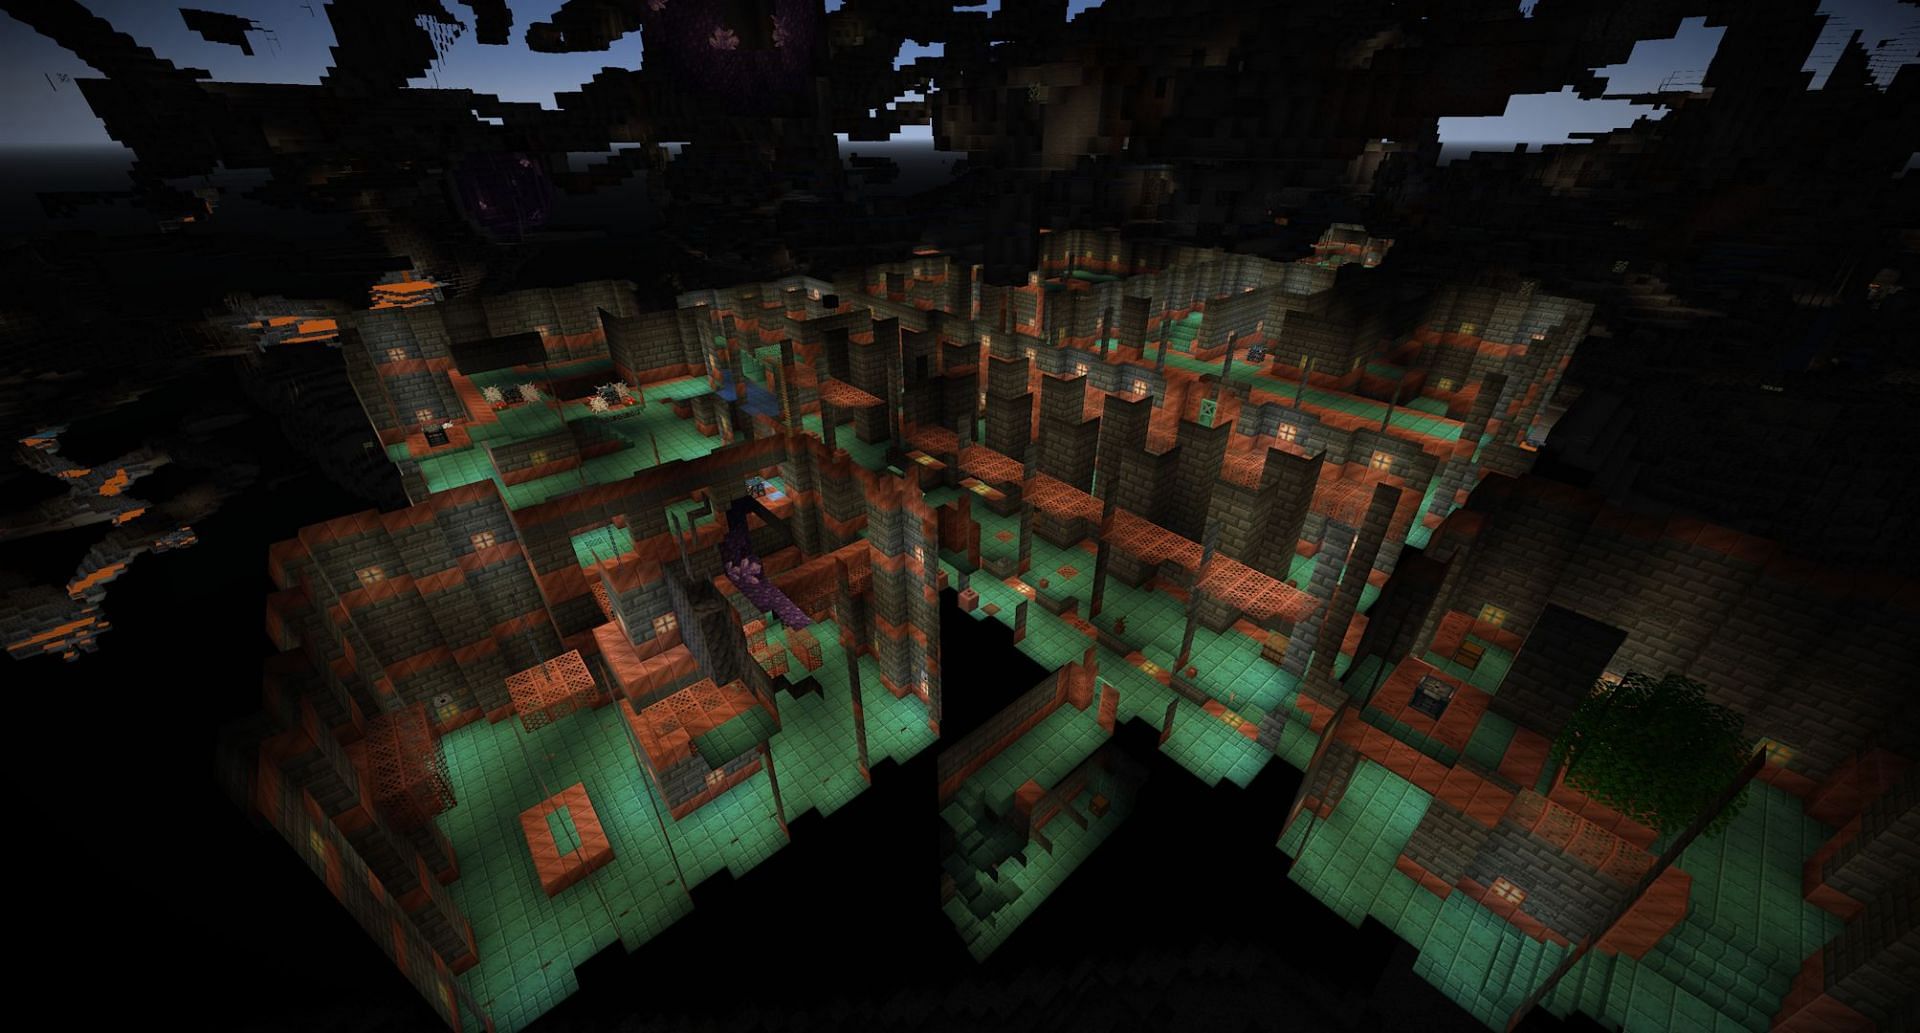 Trial chambers make the original spawner dungeons look small by comparison. (Image via Mojang)